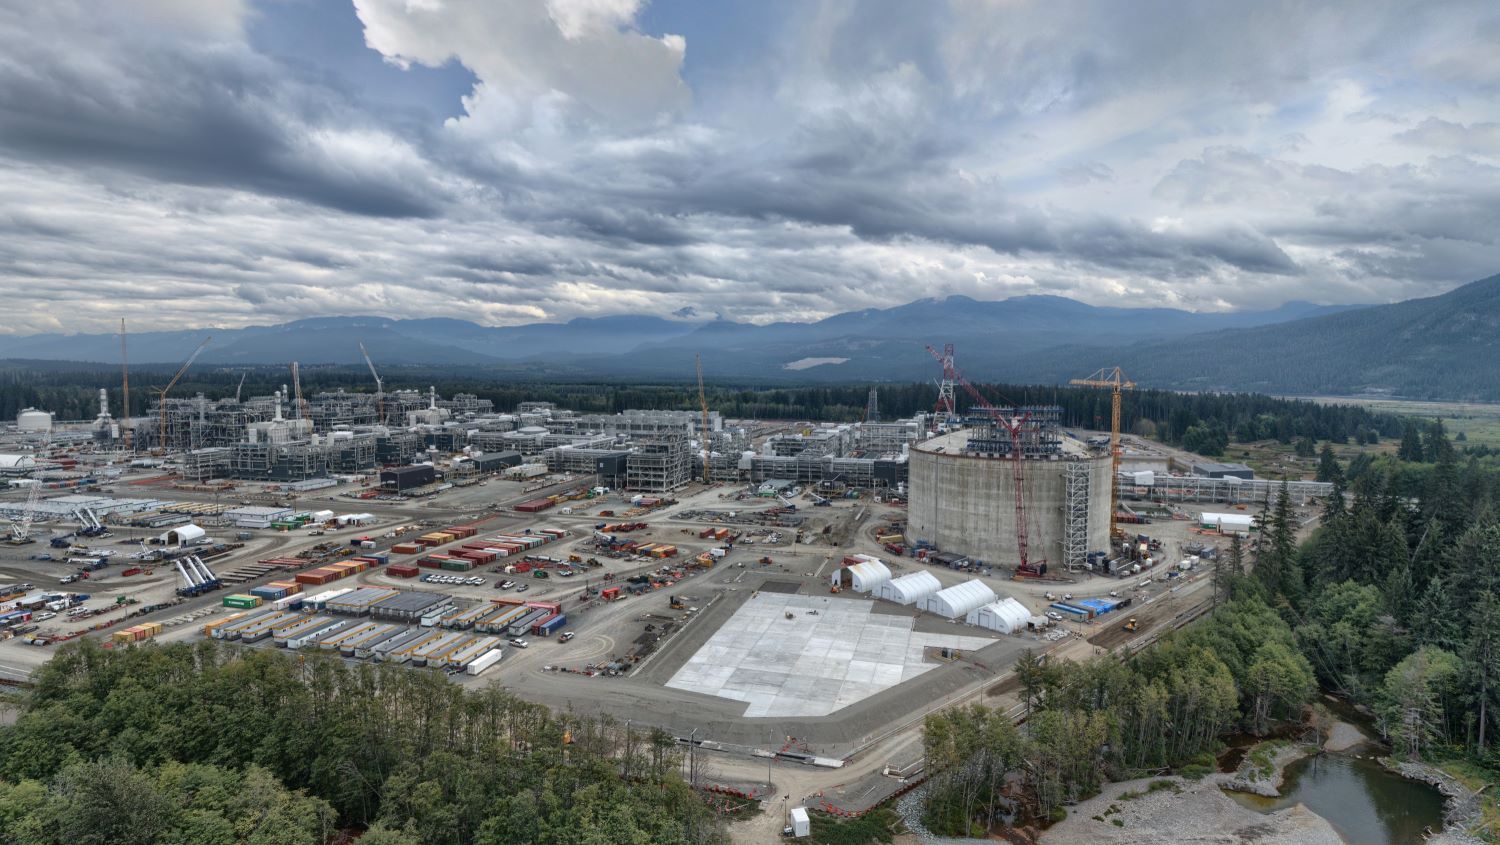 The photo shows a sprawling industrial complex under construction, with dozens of large buildings, cranes and a giant round concrete structure. It’s a cloudy day, and mountains are visible in the background.